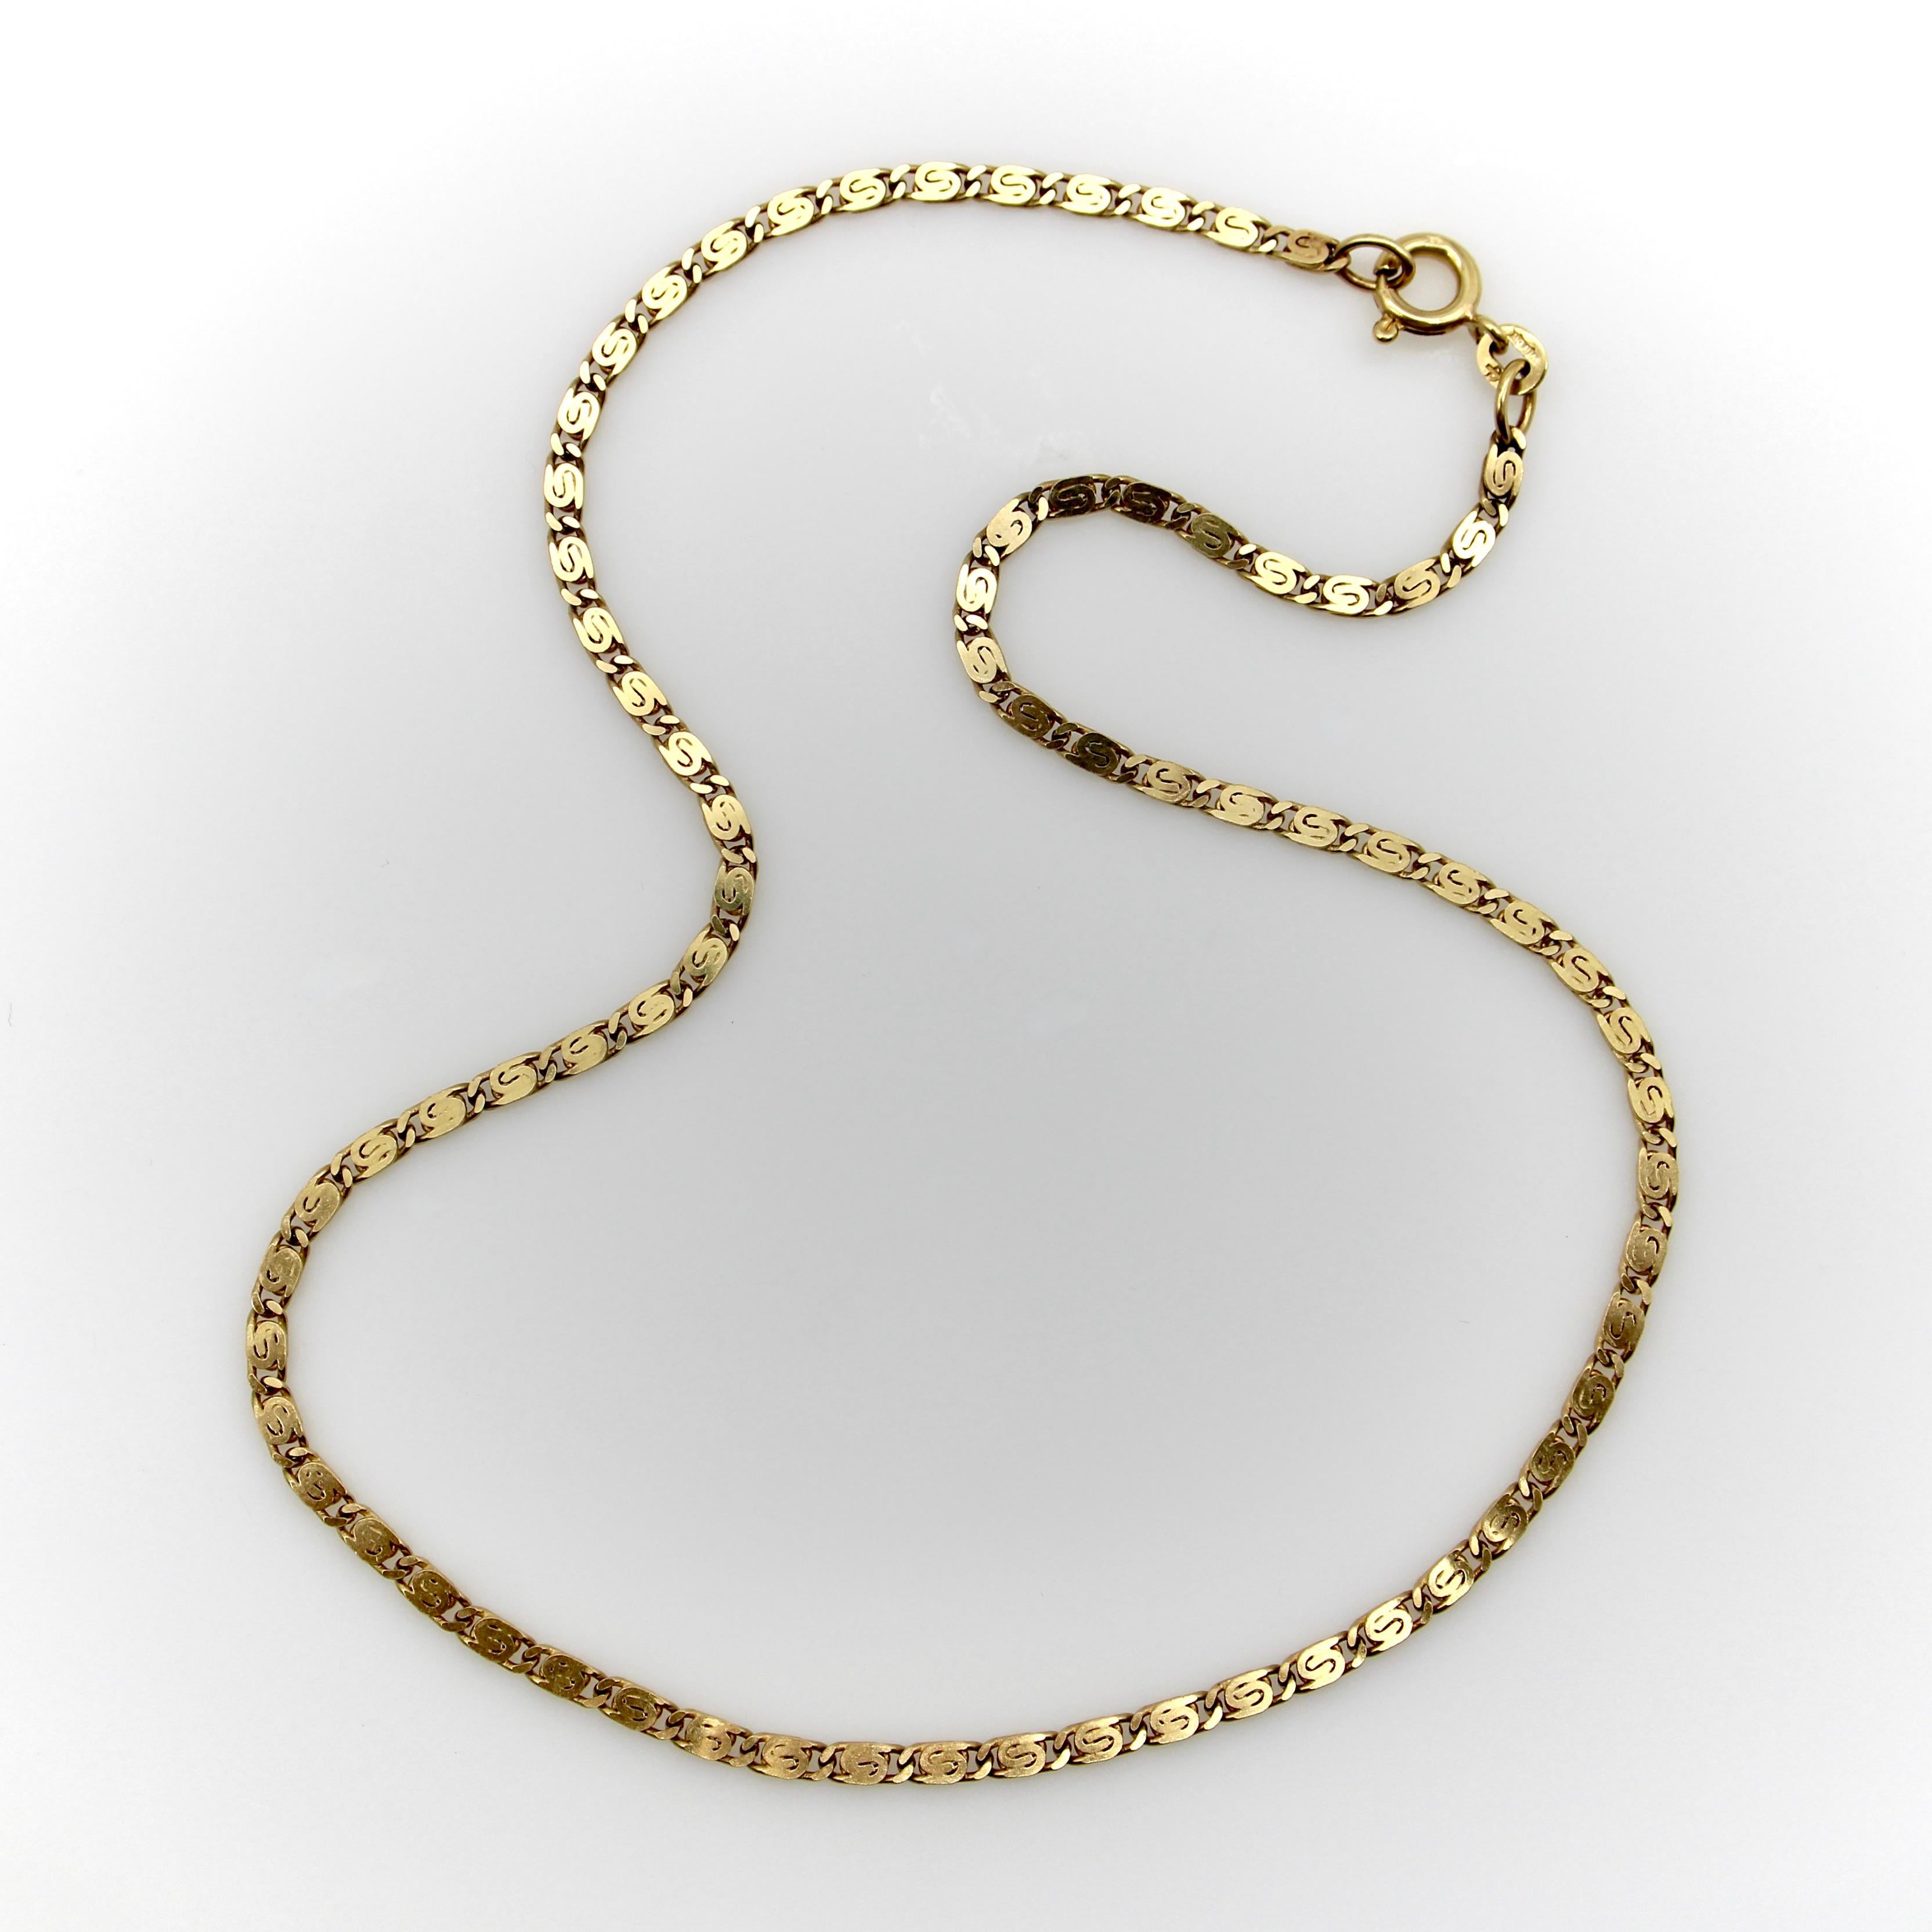 Vicenza is known as a quality gold making city, and this beautiful vintage chain is no exception. The 18k gold links are a groovy, flattened version of a Byzantine link with a yin and yang aesthetic. The necklace’s length graces the collarbone— a